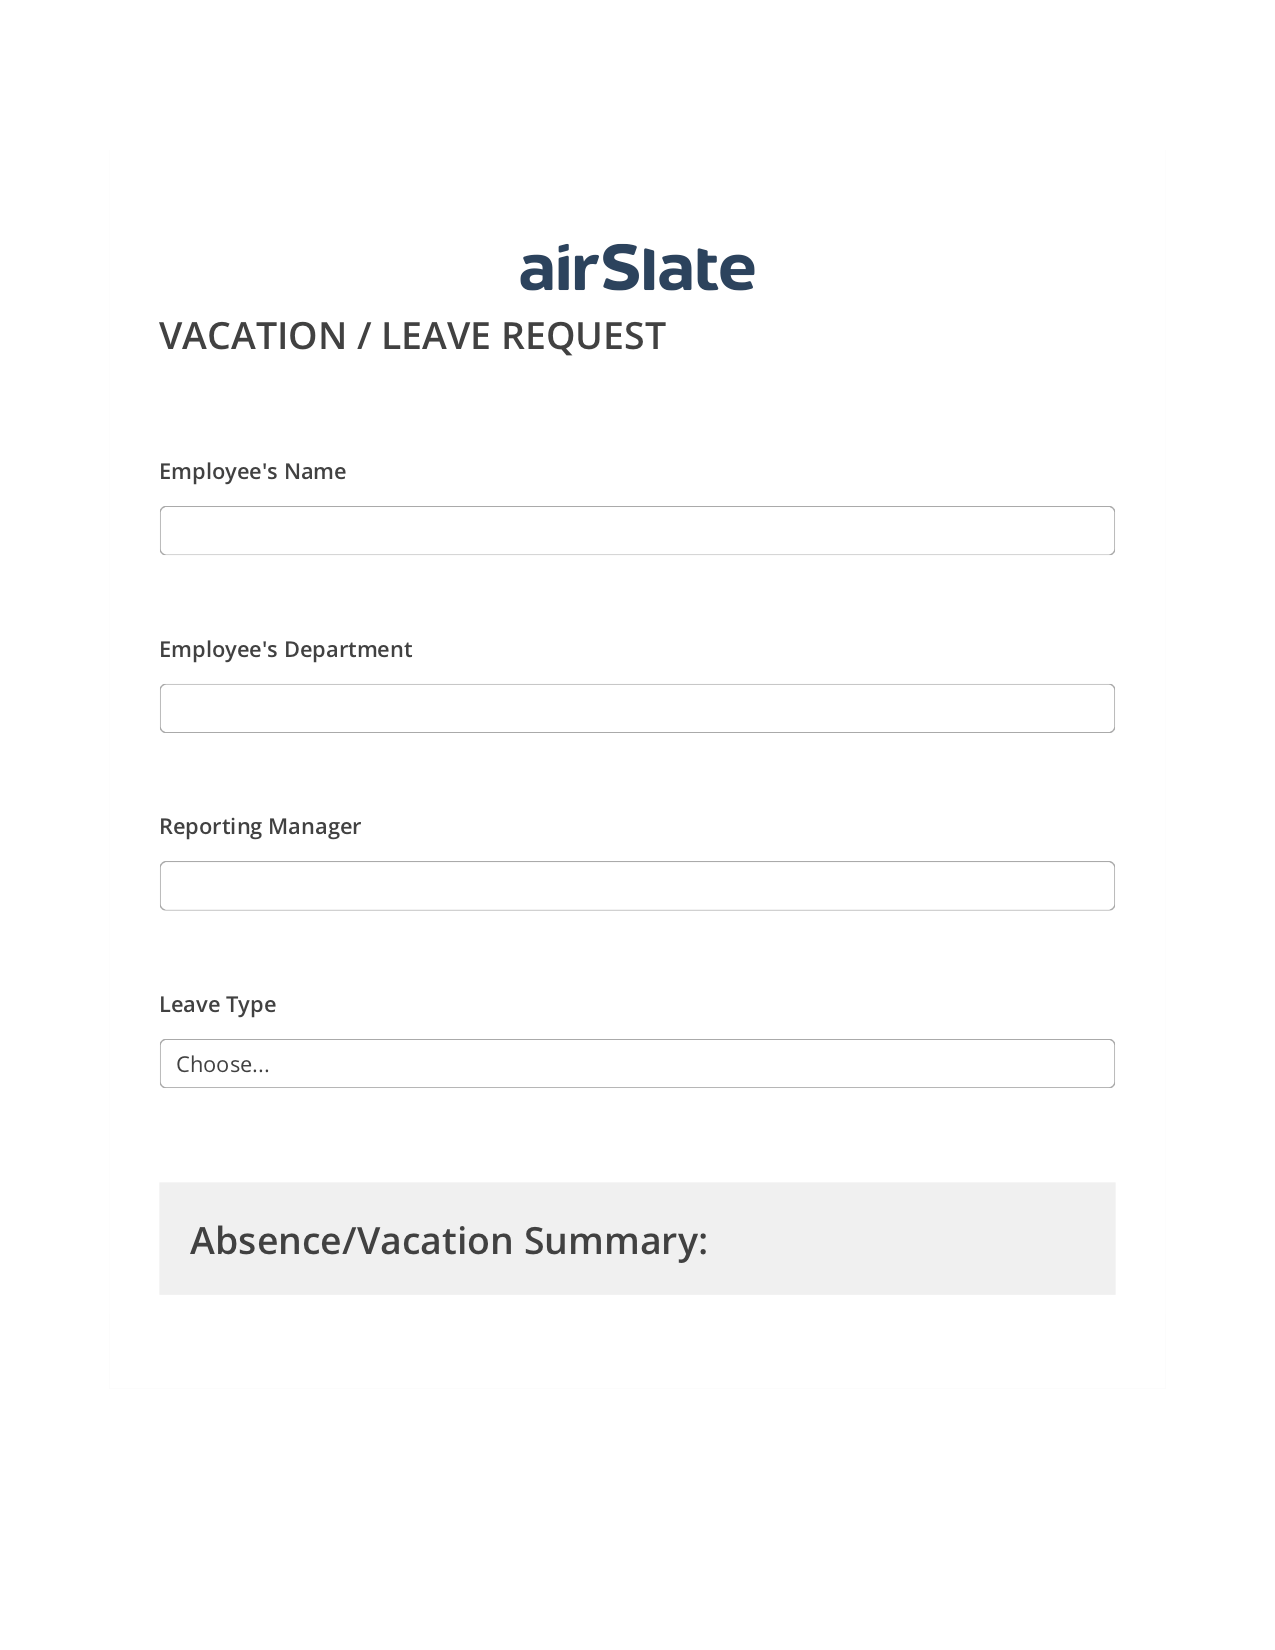 Vacation/Leave Request Workflow Pre-fill Document Bot, Create slate addon, Export to Smartsheet